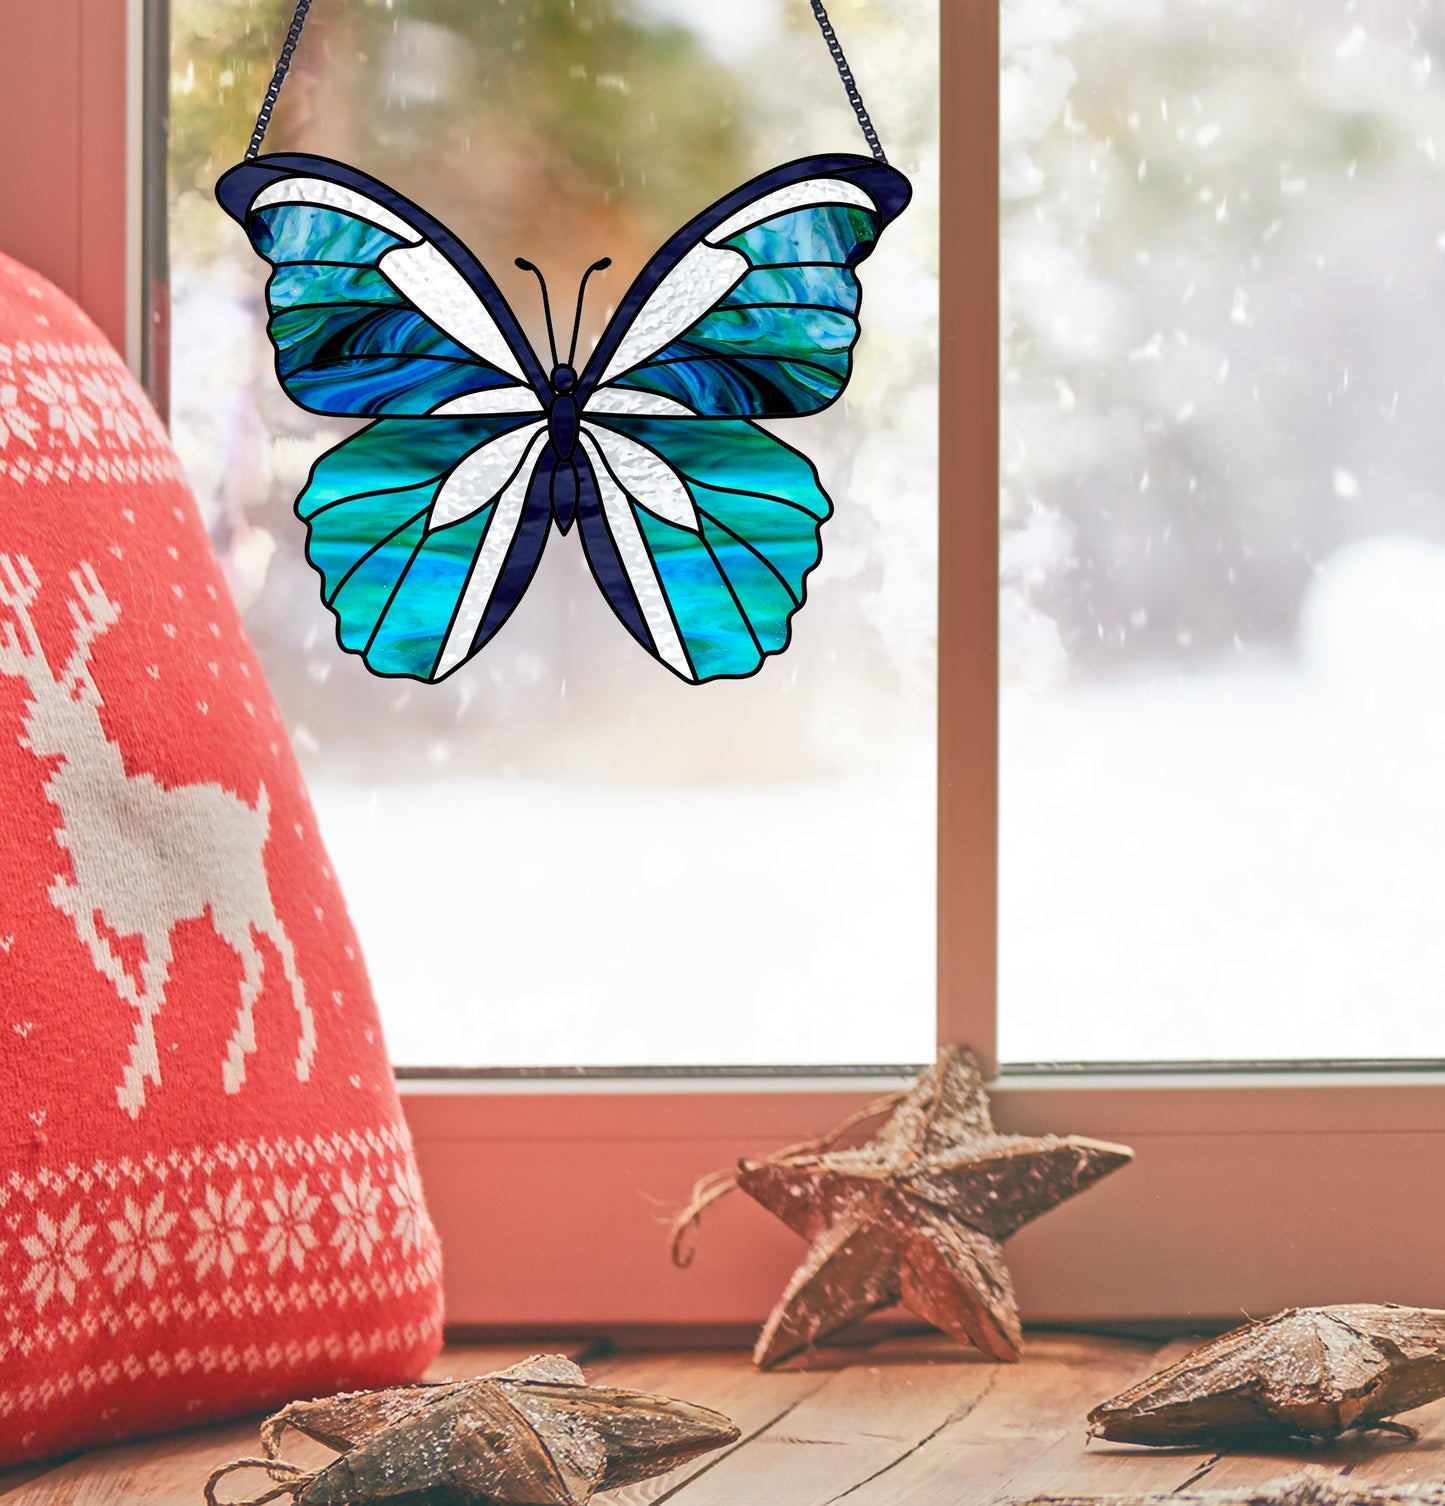 Butterfly stained glass pattern, instant PDF download, shown in bright window with Christmas decorations